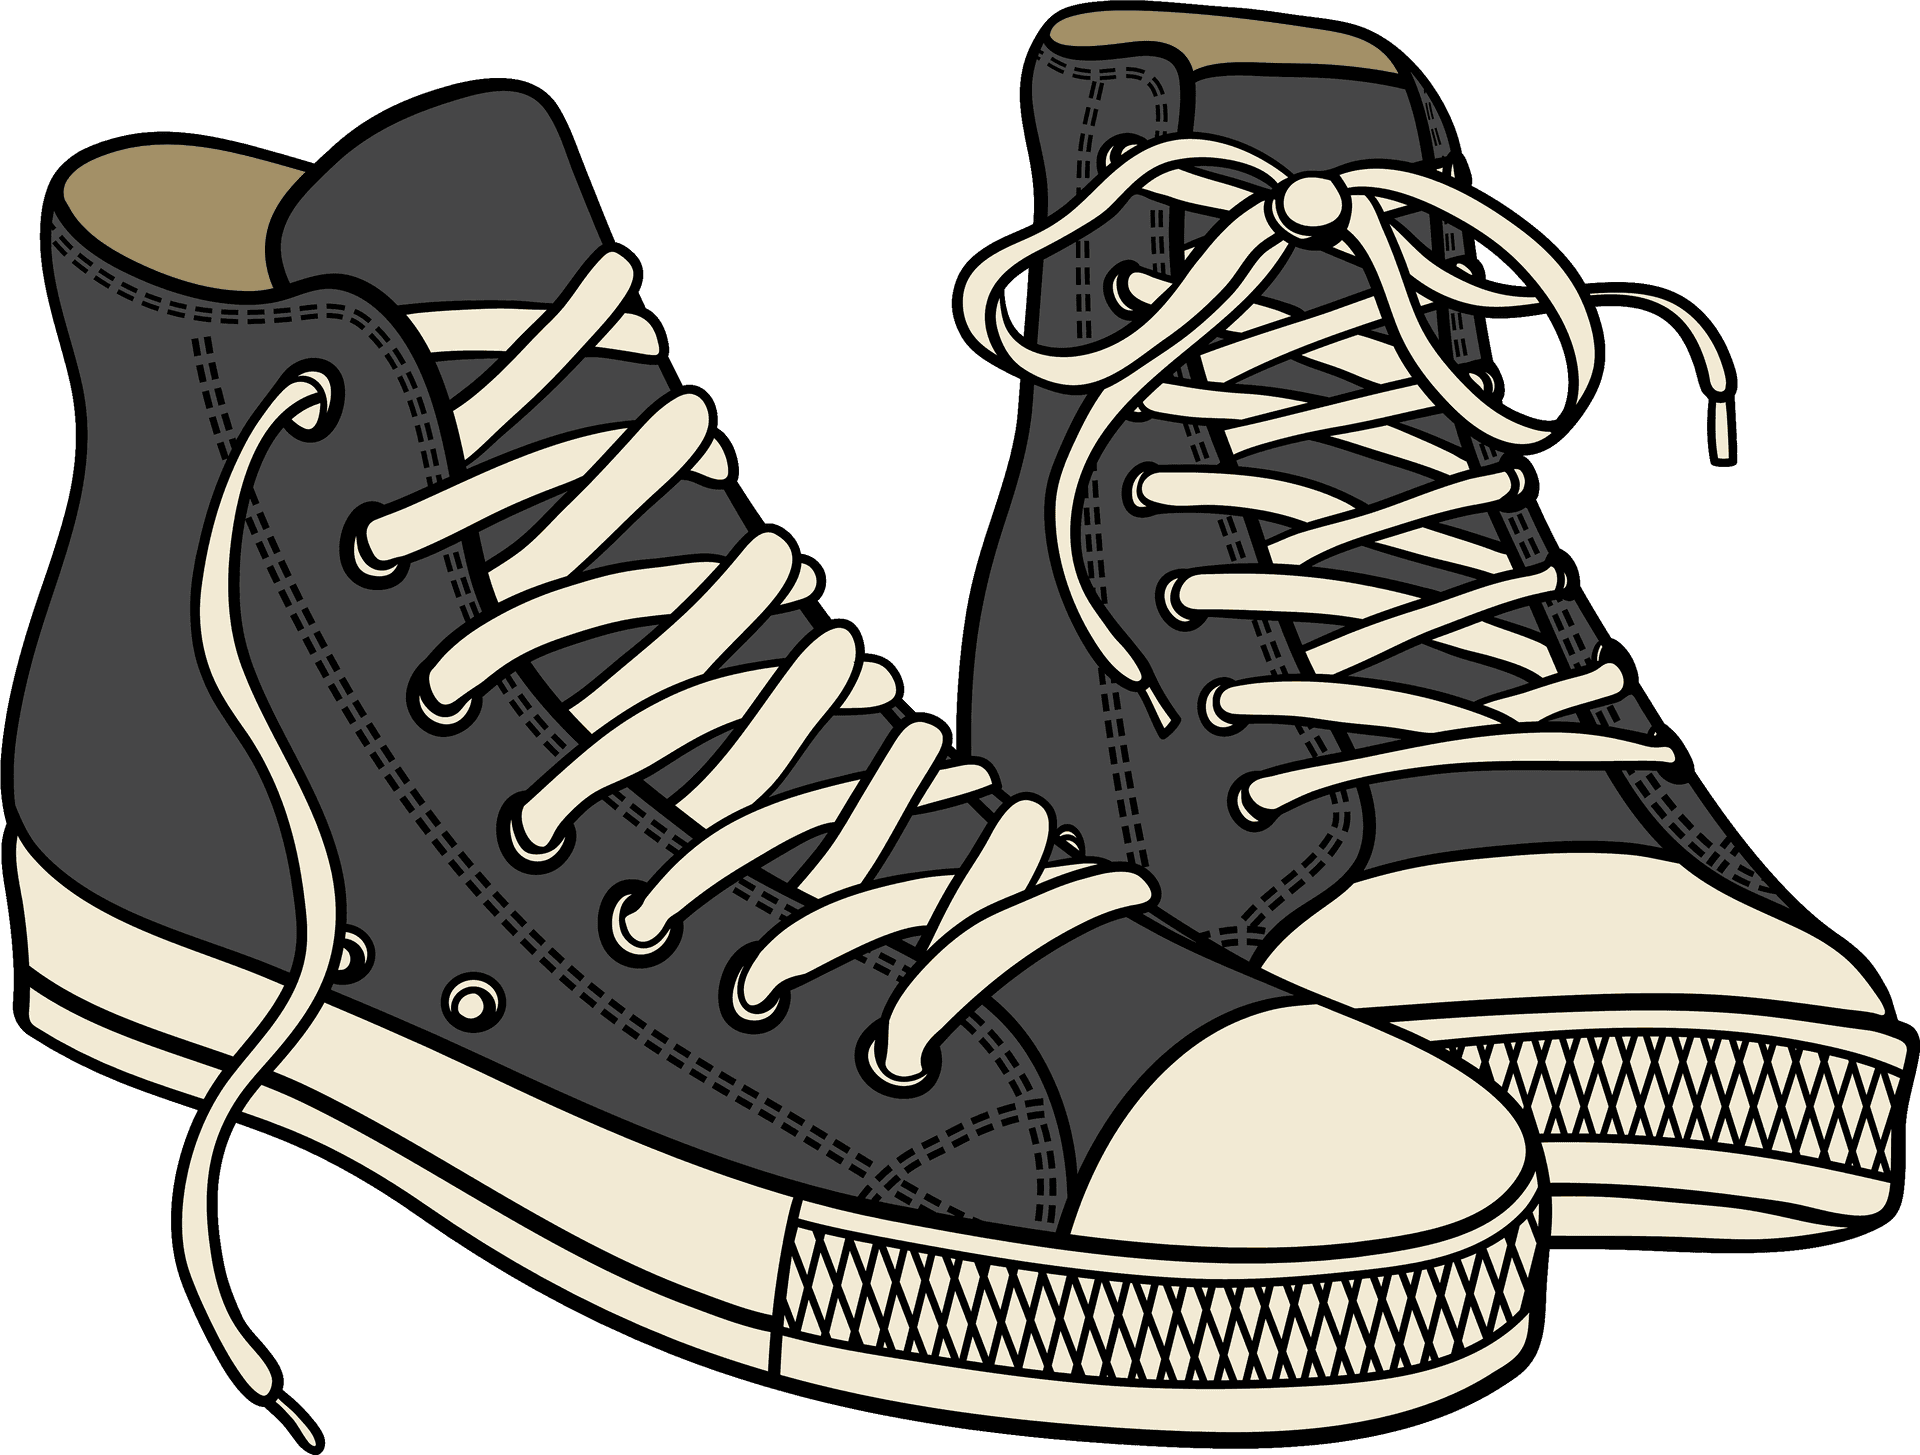 [100+] Sneaker Png Images | Wallpapers.com